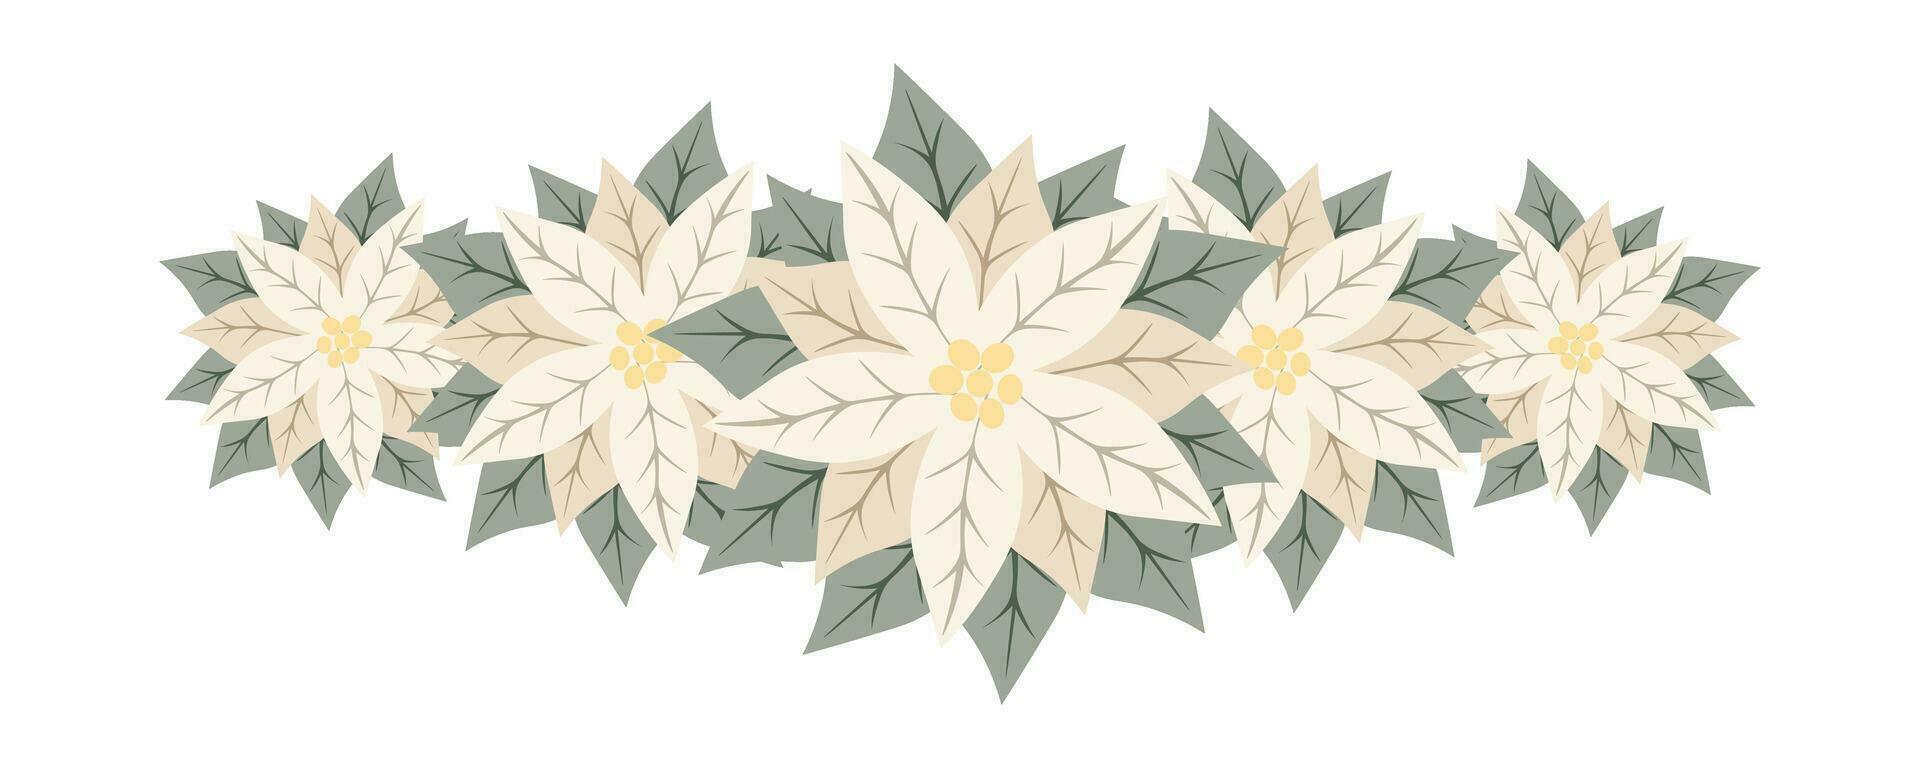 Decorative branch of white poinsettia flowers. Isolated floral New Year and Christmas decor for greeting card, invitation, holiday design vector